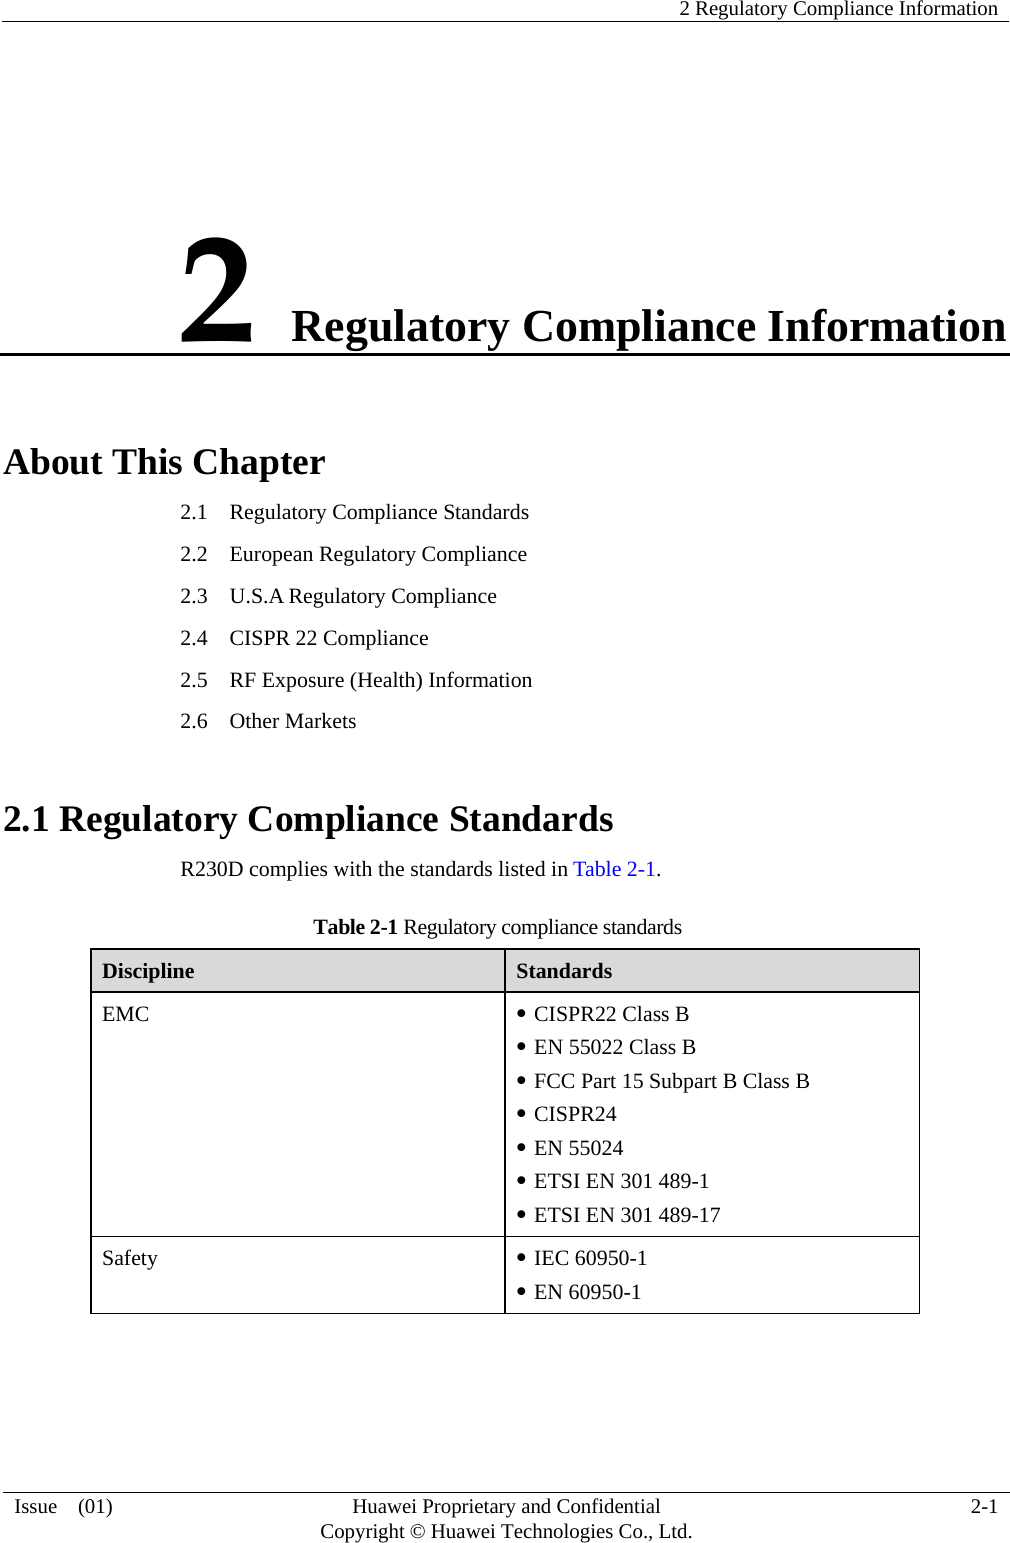    2 Regulatory Compliance Information  Issue  (01)  Huawei Proprietary and Confidential     Copyright © Huawei Technologies Co., Ltd. 2-1 2 Regulatory Compliance Information About This Chapter 2.1    Regulatory Compliance Standards 2.2  European Regulatory Compliance 2.3  U.S.A Regulatory Compliance 2.4    CISPR 22 Compliance 2.5    RF Exposure (Health) Information 2.6  Other Markets 2.1 Regulatory Compliance Standards R230D complies with the standards listed in Table 2-1. Table 2-1 Regulatory compliance standards Discipline  Standards EMC  z CISPR22 Class B z EN 55022 Class B z FCC Part 15 Subpart B Class B z CISPR24 z EN 55024 z ETSI EN 301 489-1   z ETSI EN 301 489-17 Safety  z IEC 60950-1 z EN 60950-1 